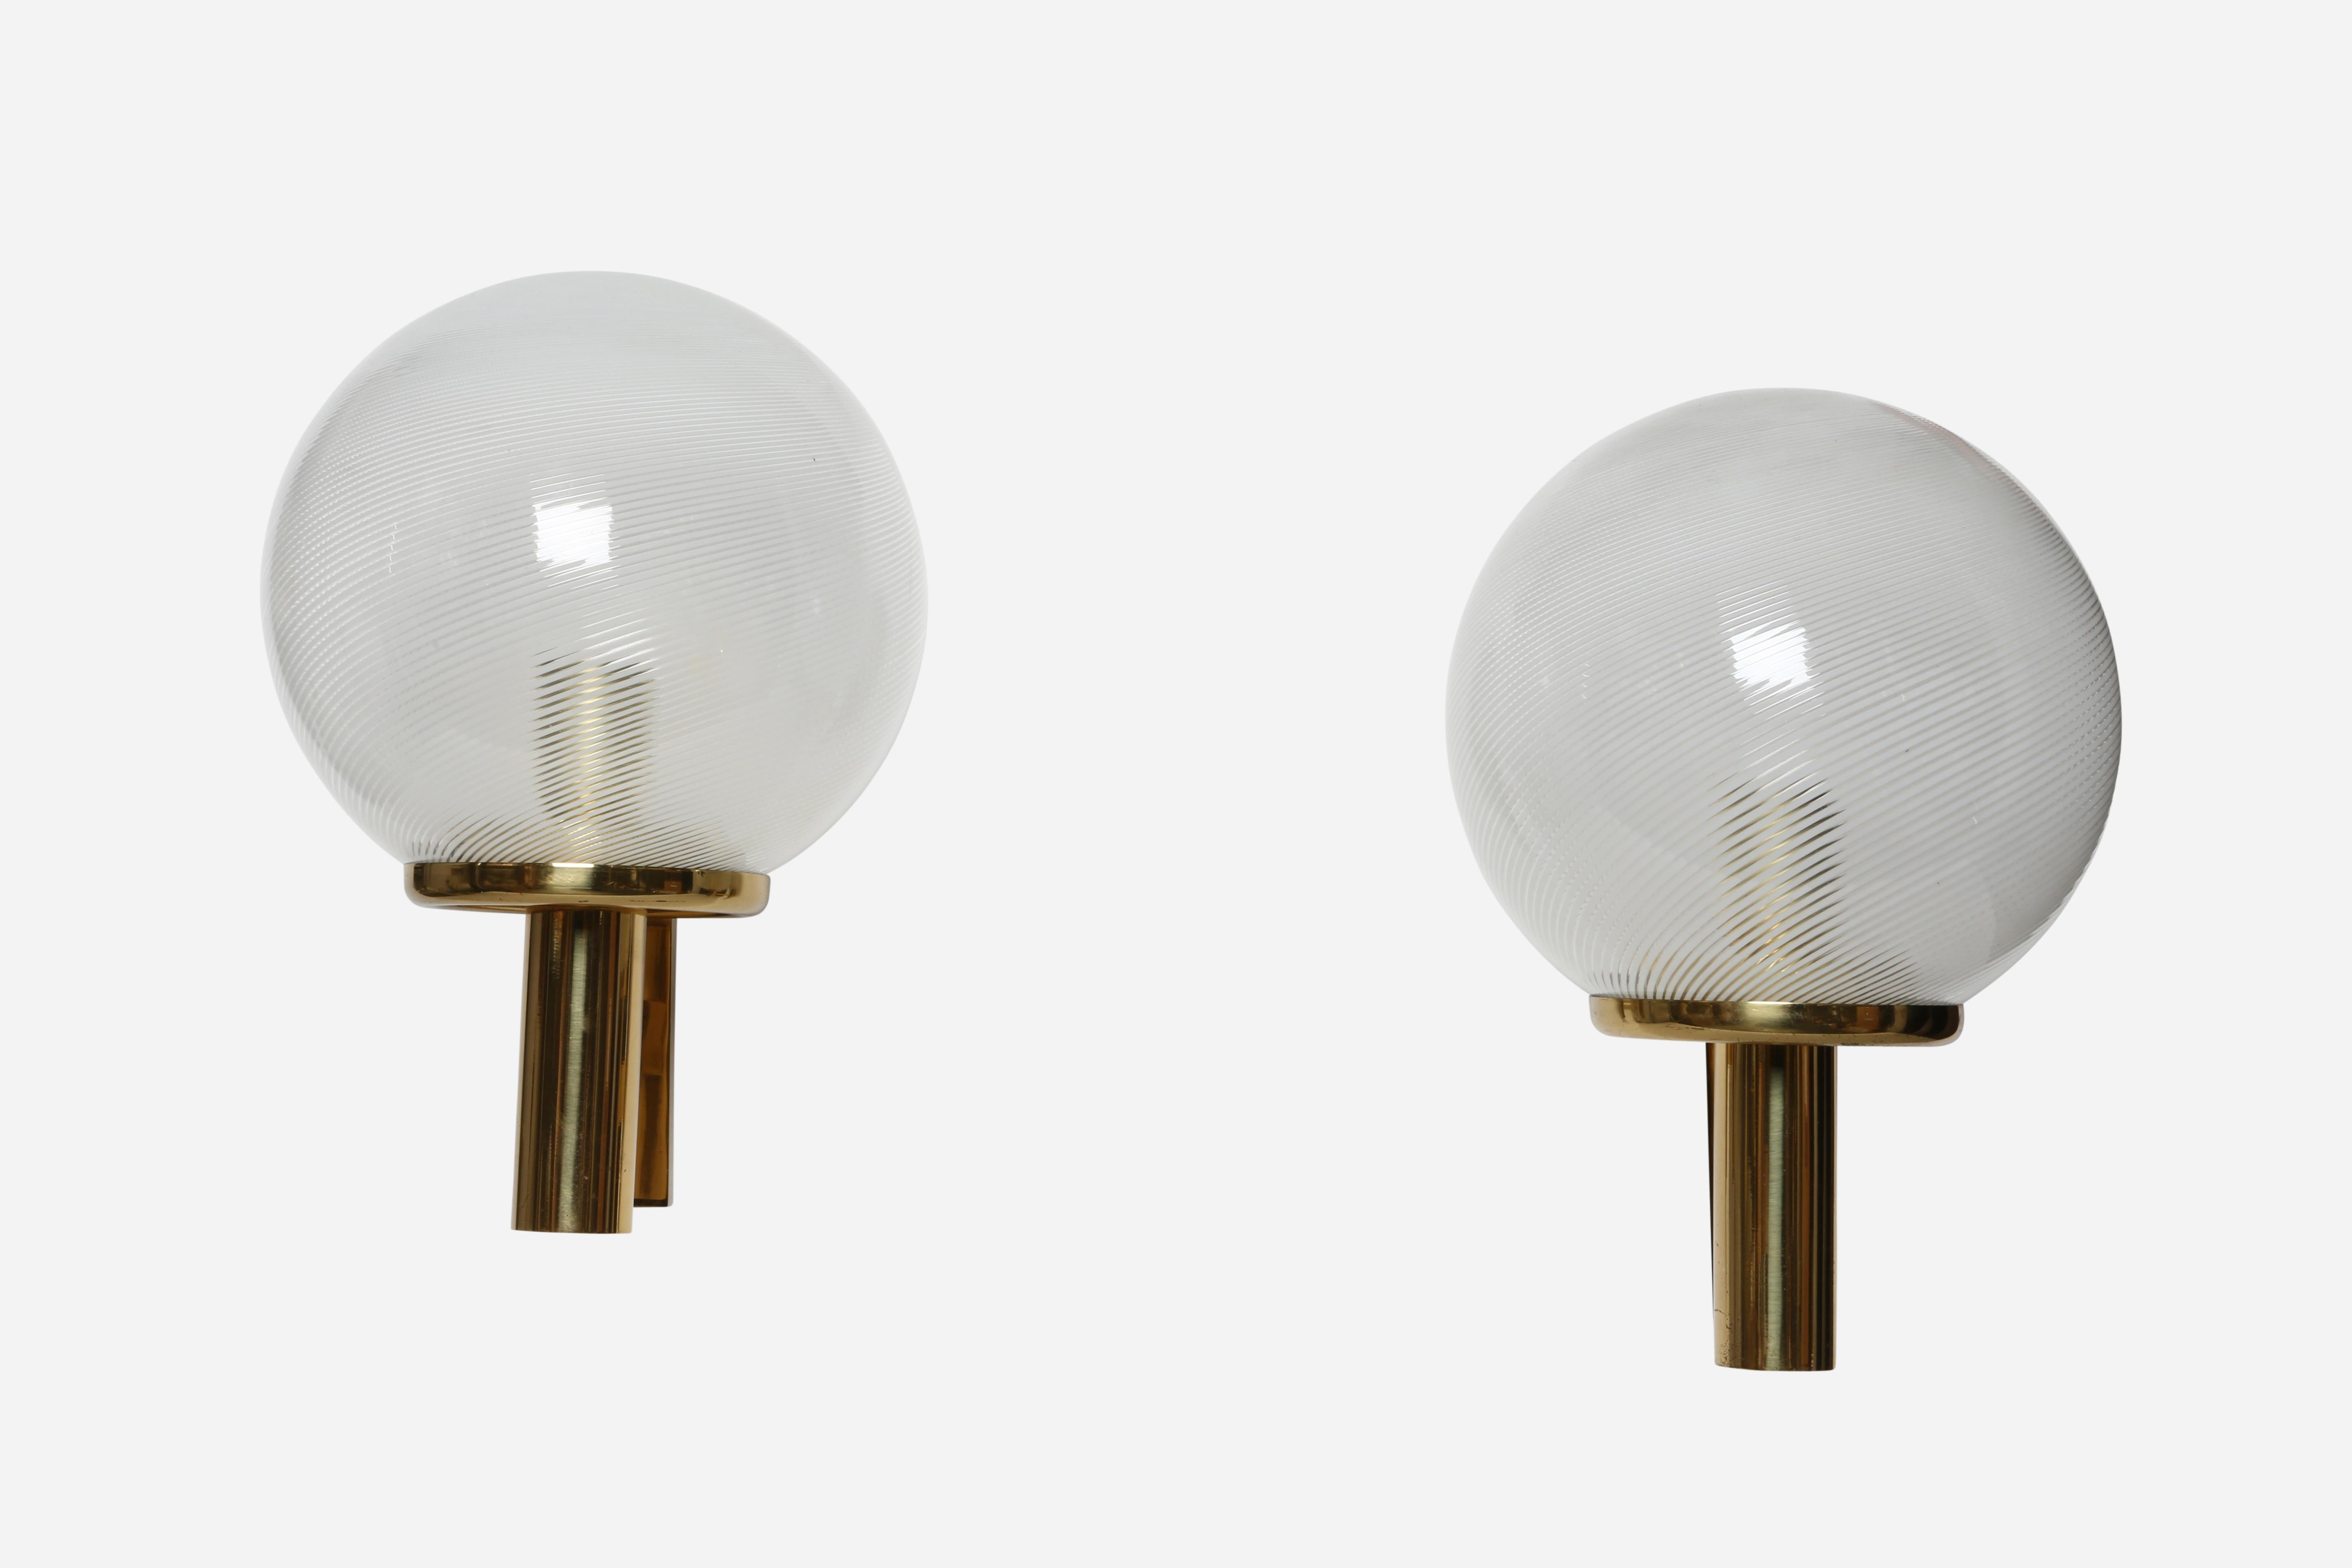 Pair of Murano glass sconces by Venini, attributed
Made in Italy in 1960s
Filigrana glass, brass
Take one medium bulb each
Complimentary US rewiring upon request.

We take pride in bringing vintage fixtures to their full glory again.
At Illustris